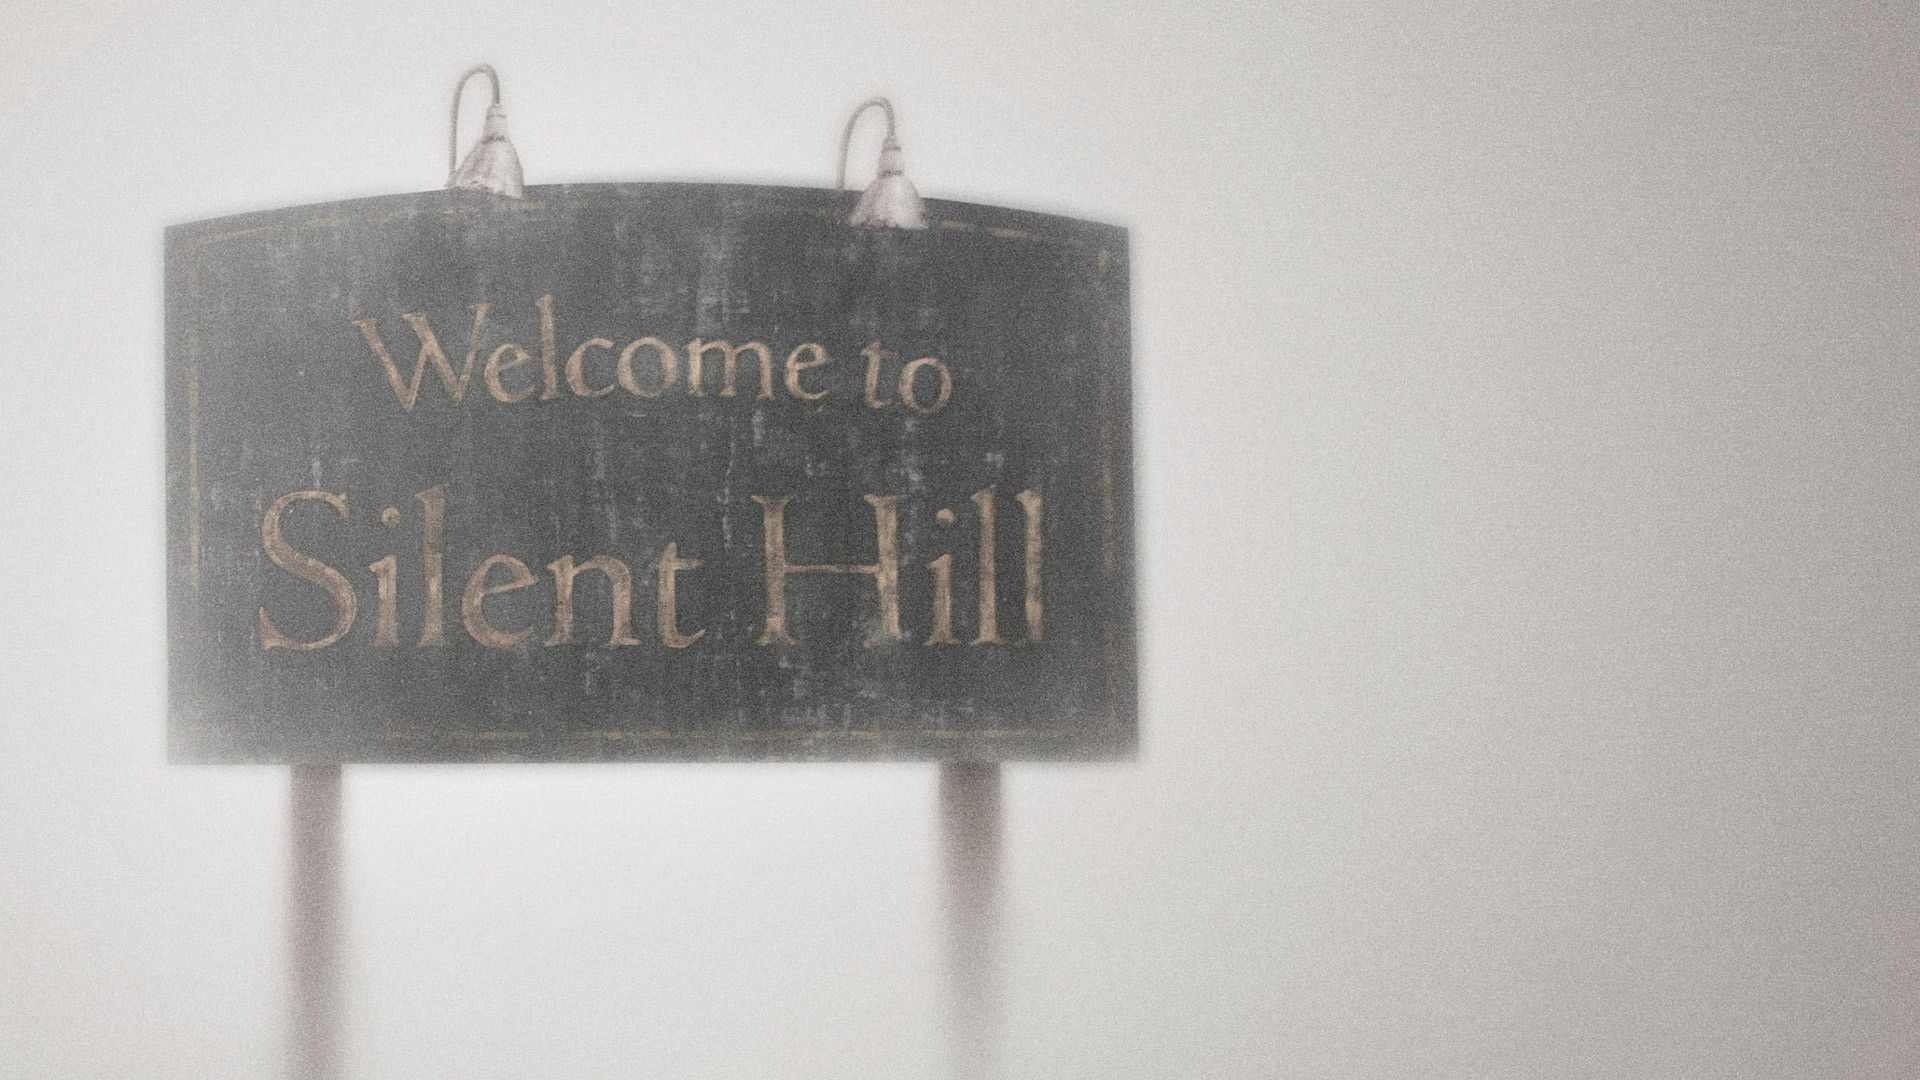 Multiple Silent Hill projects are reportedly in the works